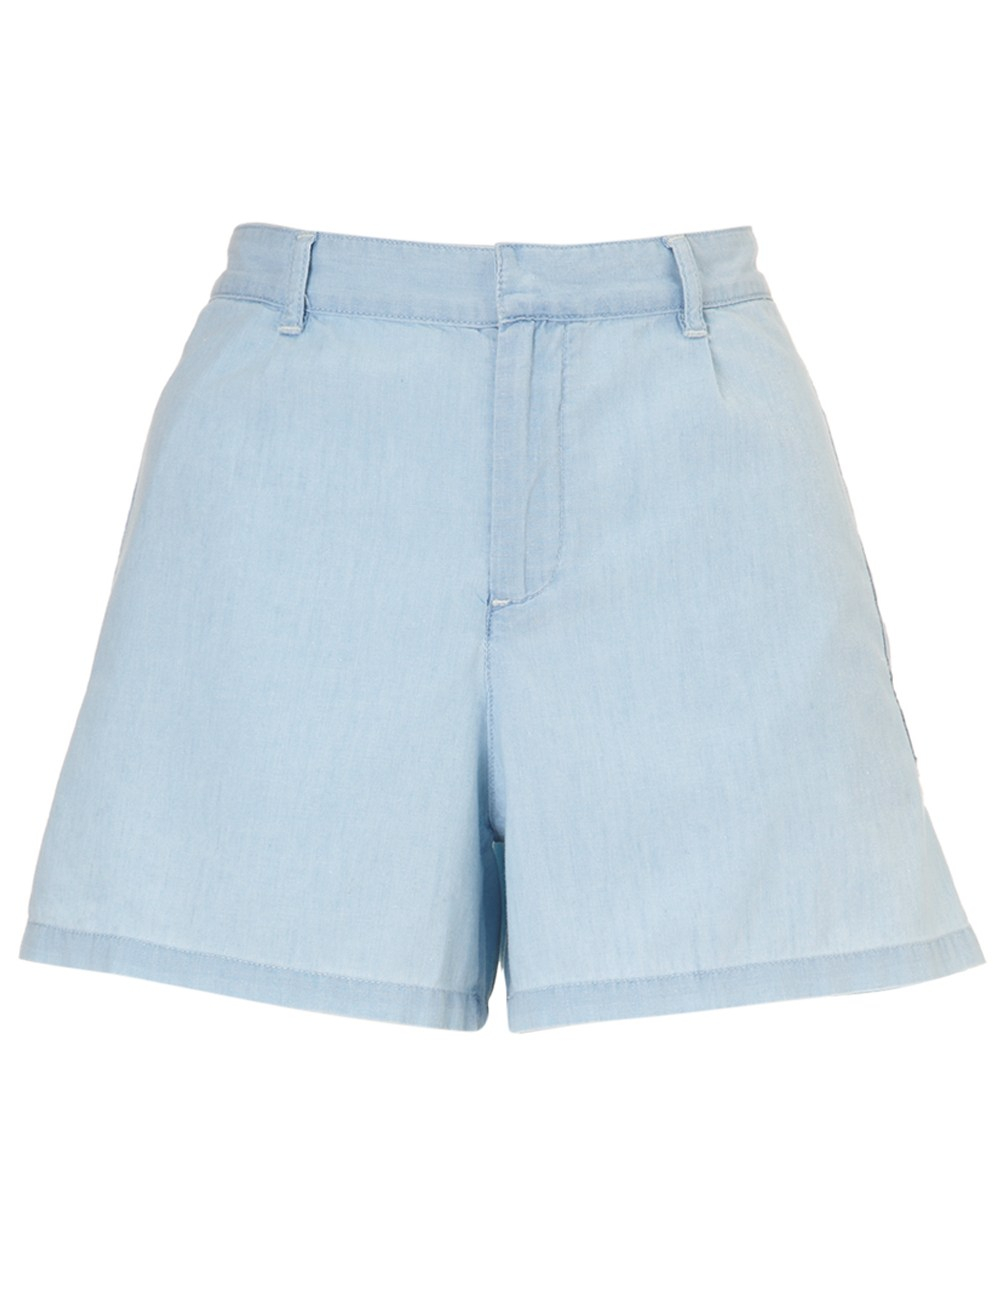 A.p.c. Chambray Cotton Shorts in Blue | Lyst